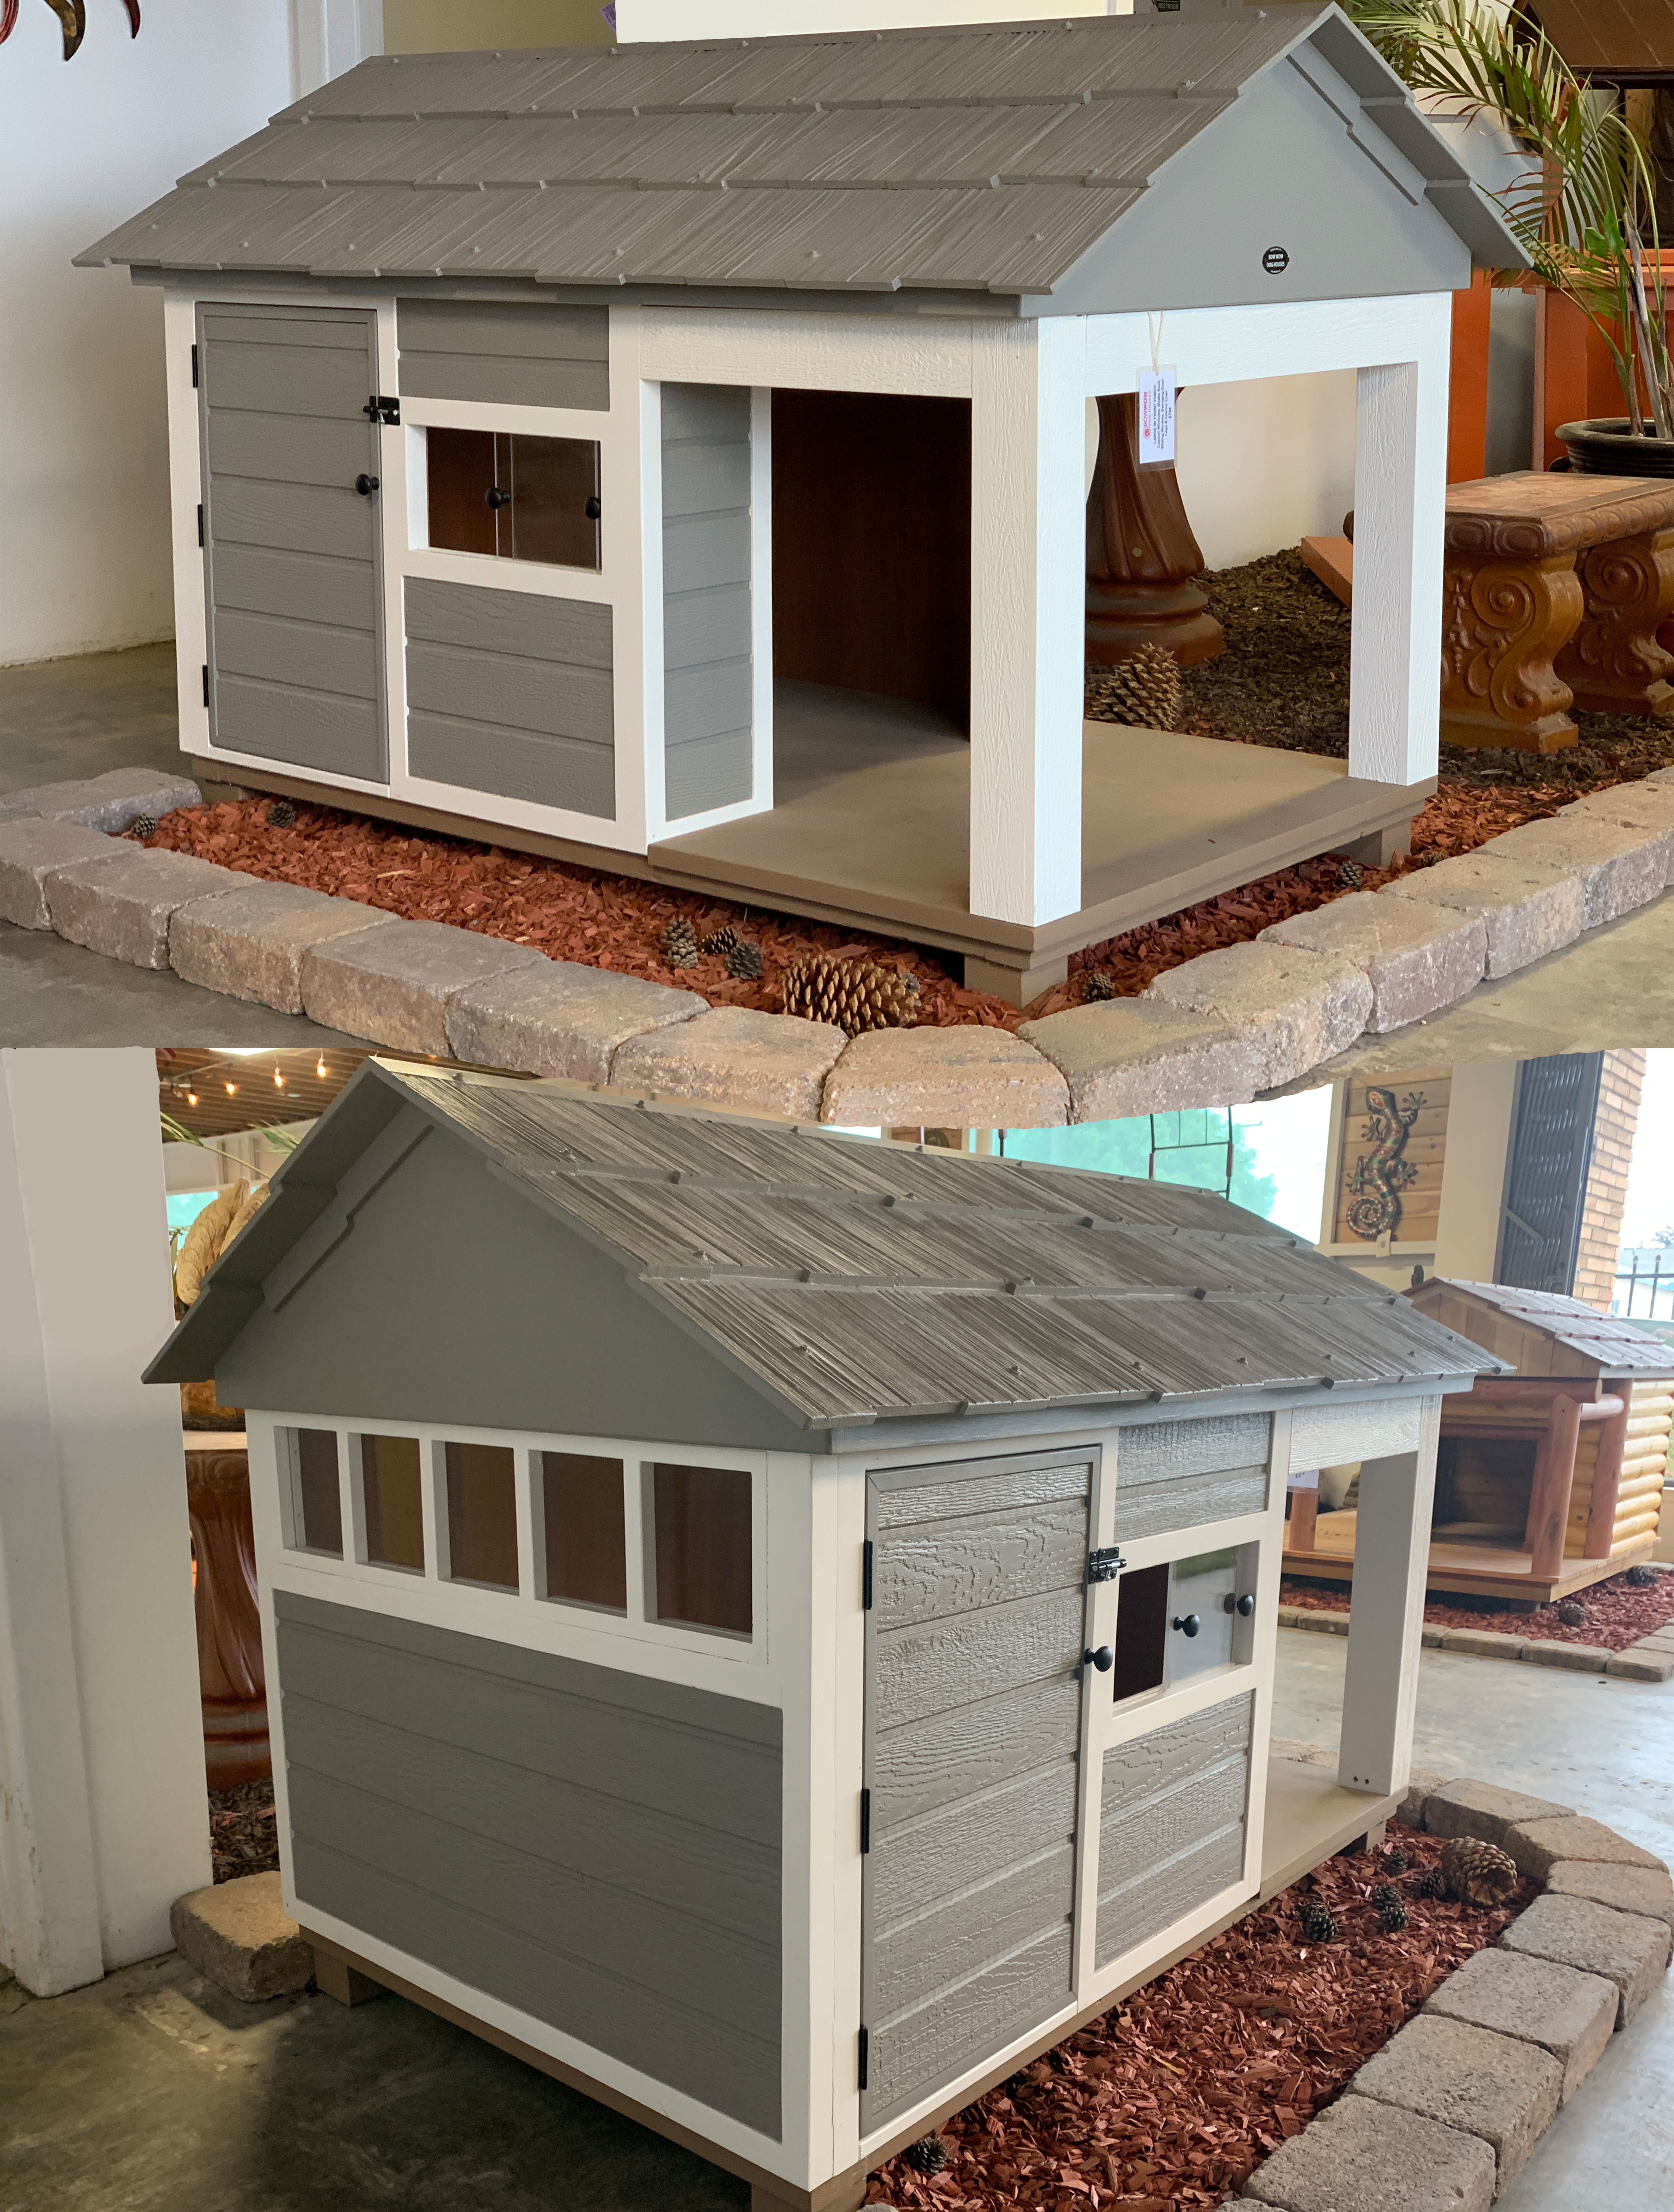 dog house with covered porch